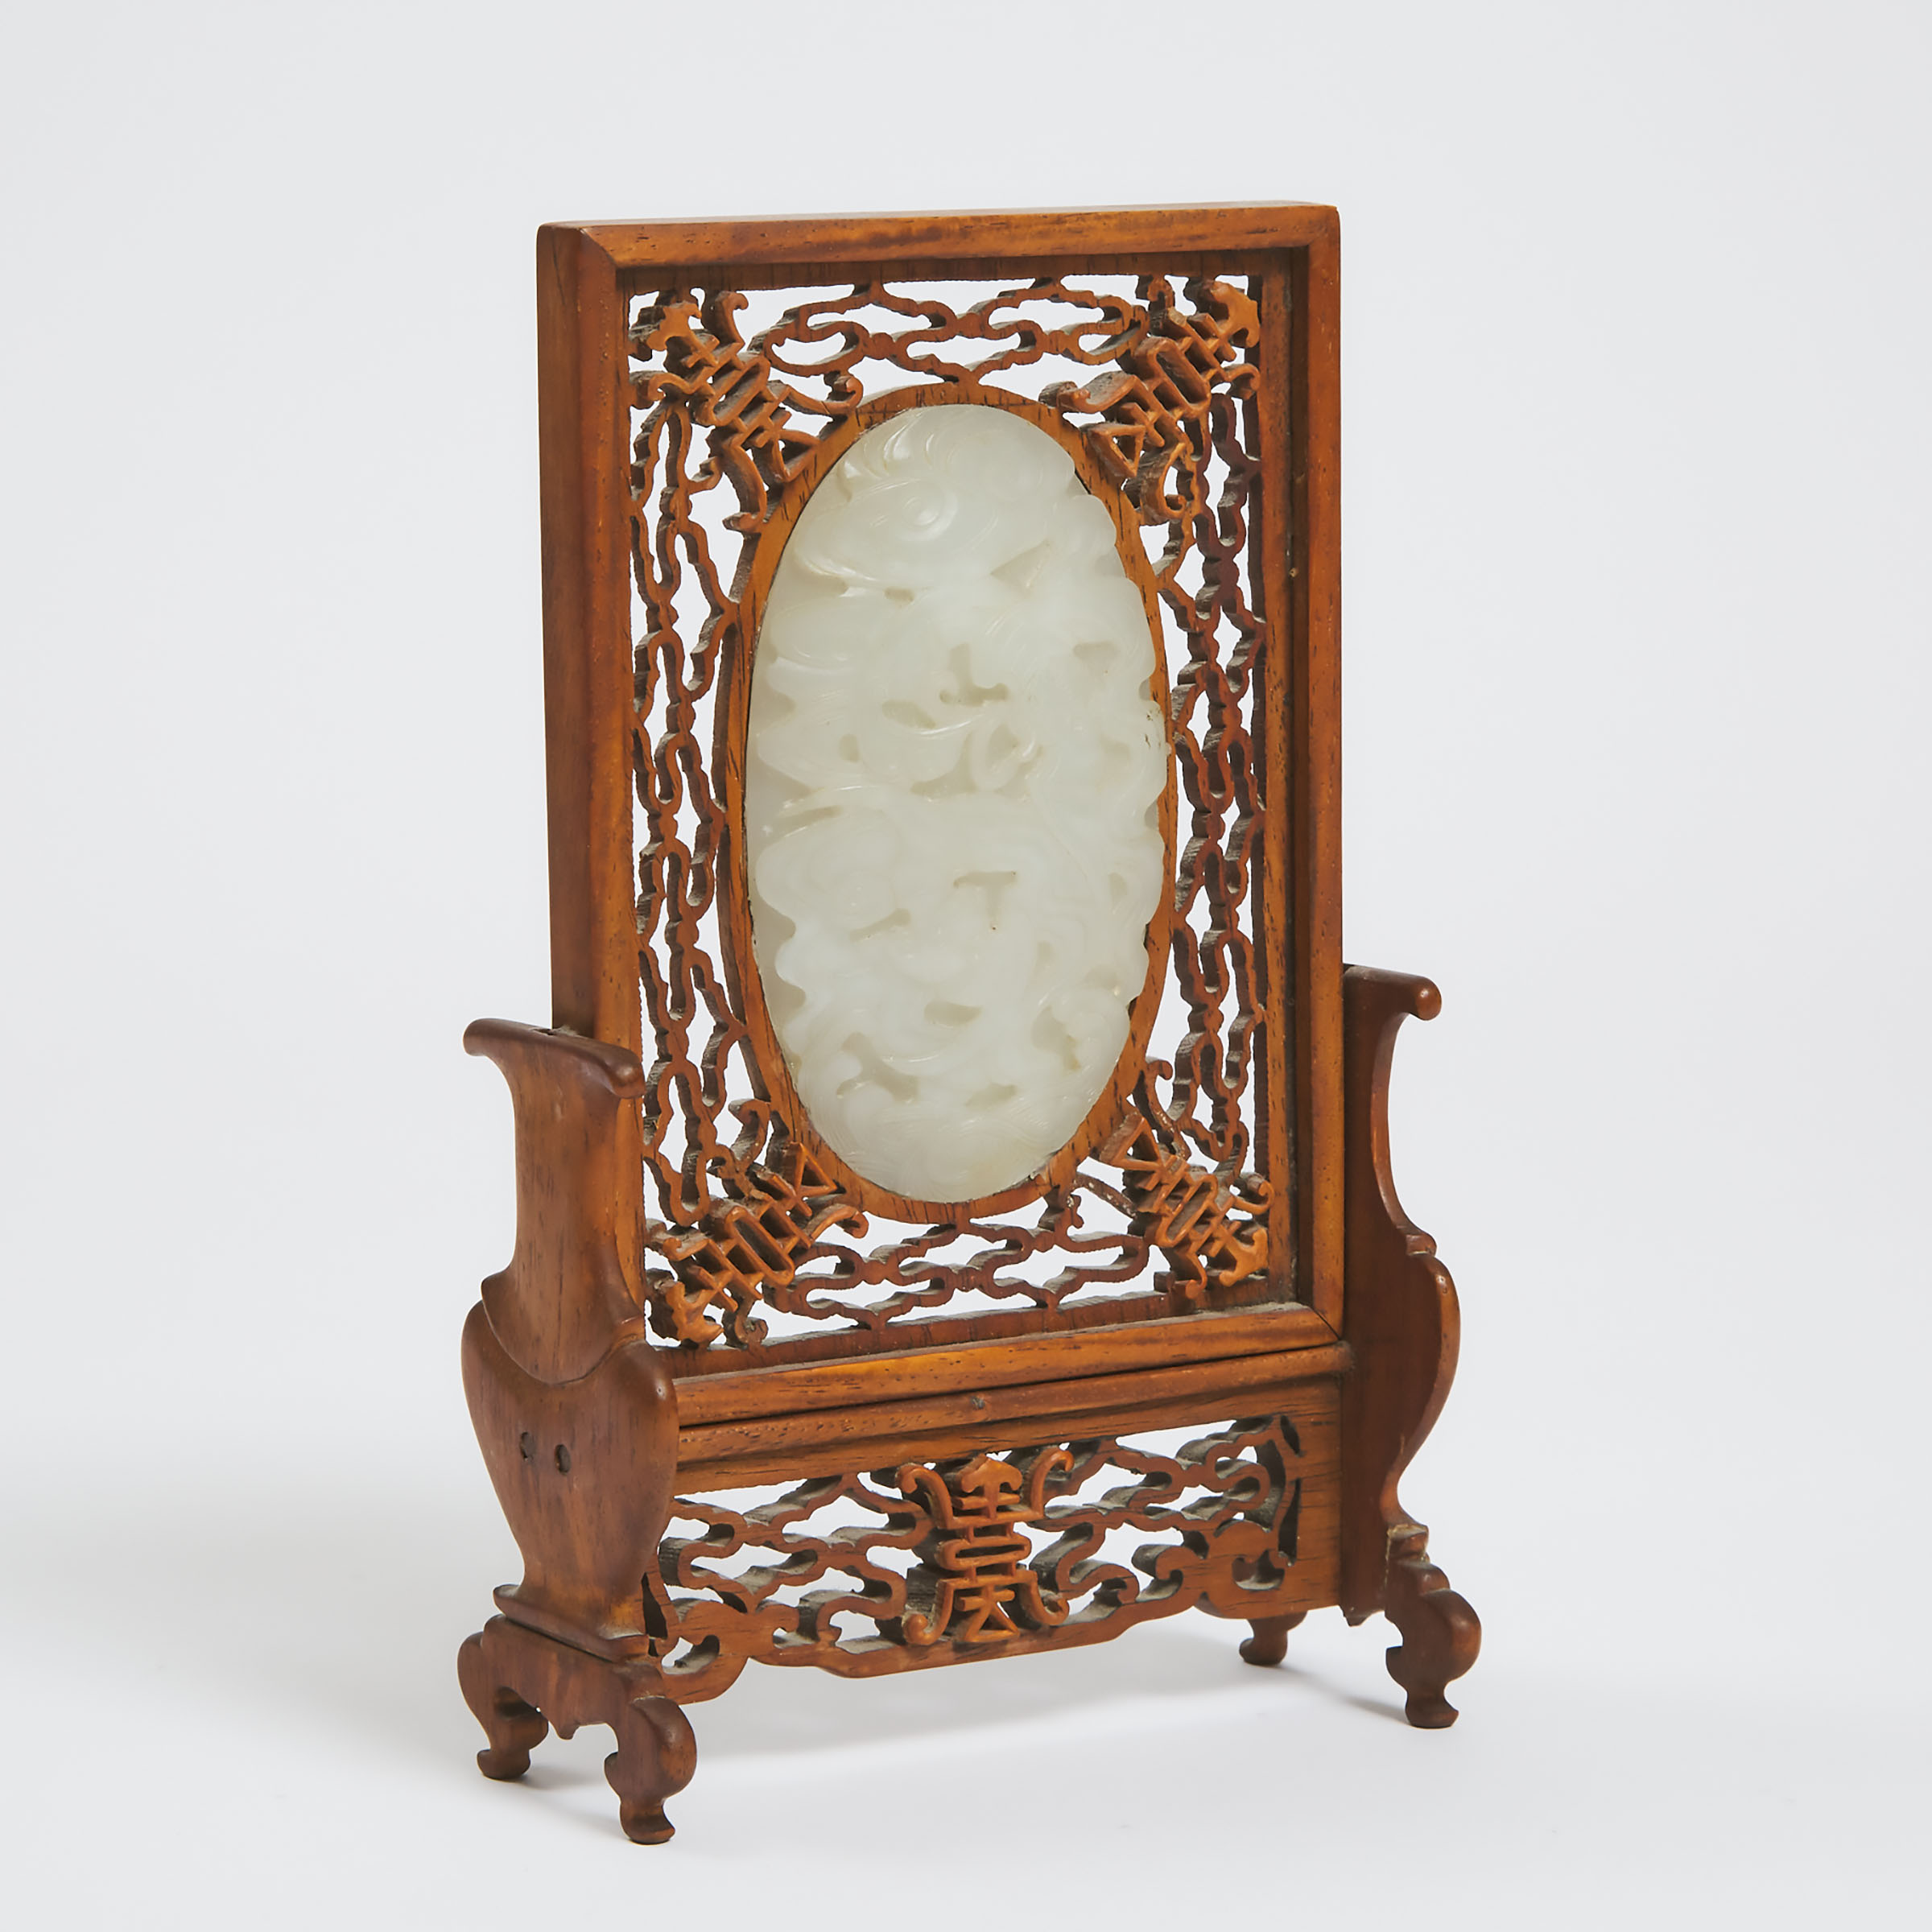 A White Jade-Inset Rosewood Table Screen, Qing Dynasty, 19th Century